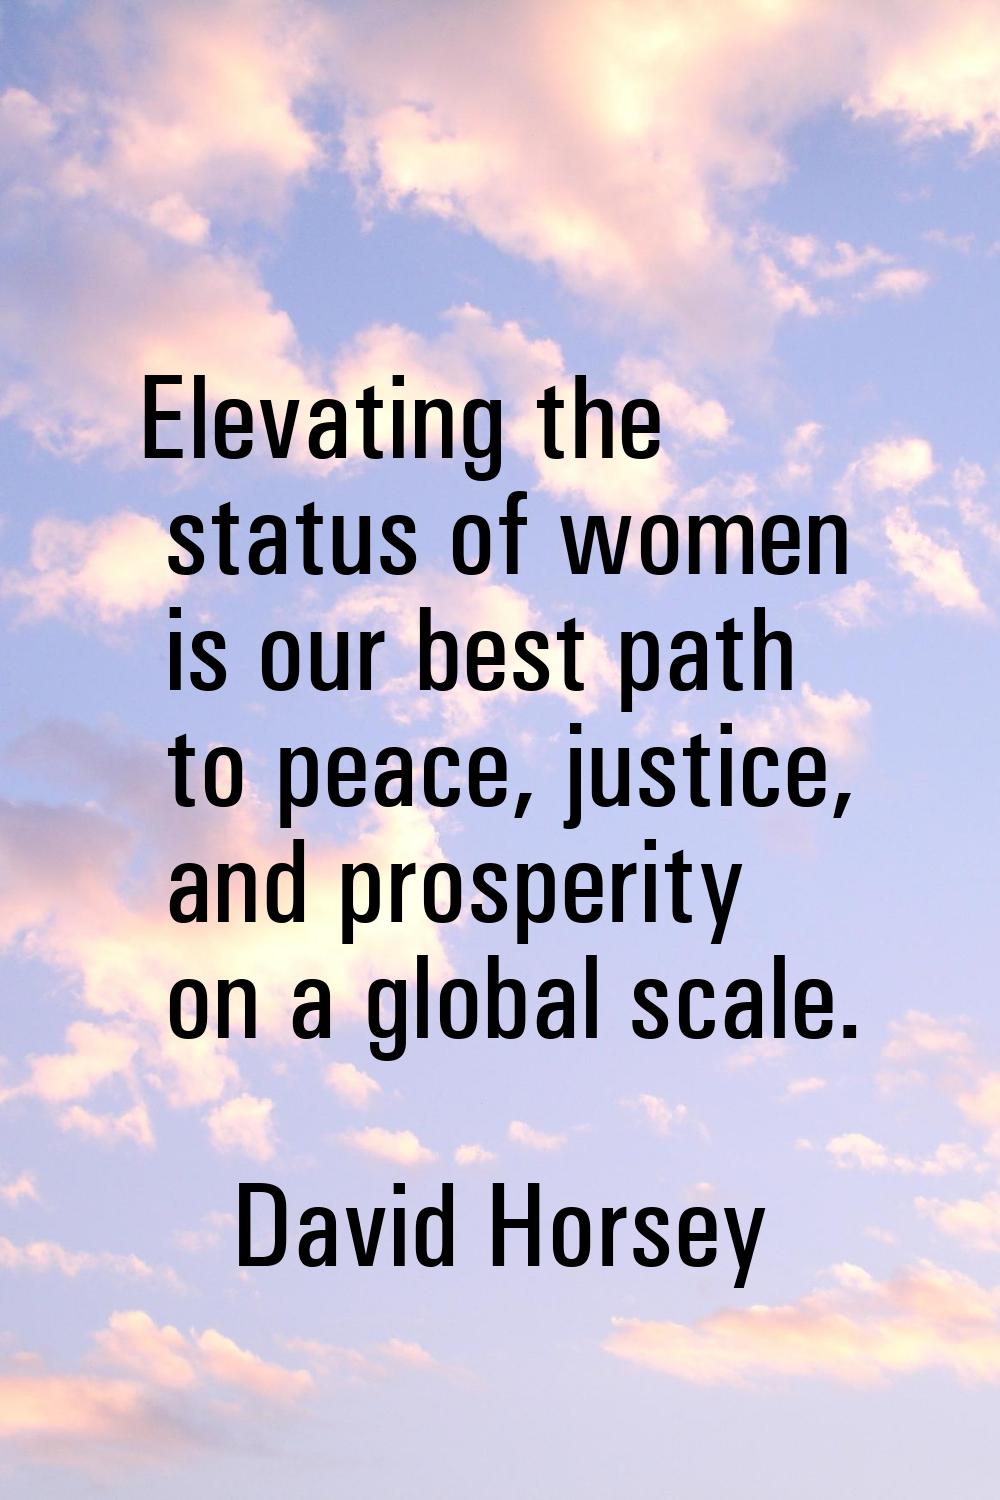 Elevating the status of women is our best path to peace, justice, and prosperity on a global scale.